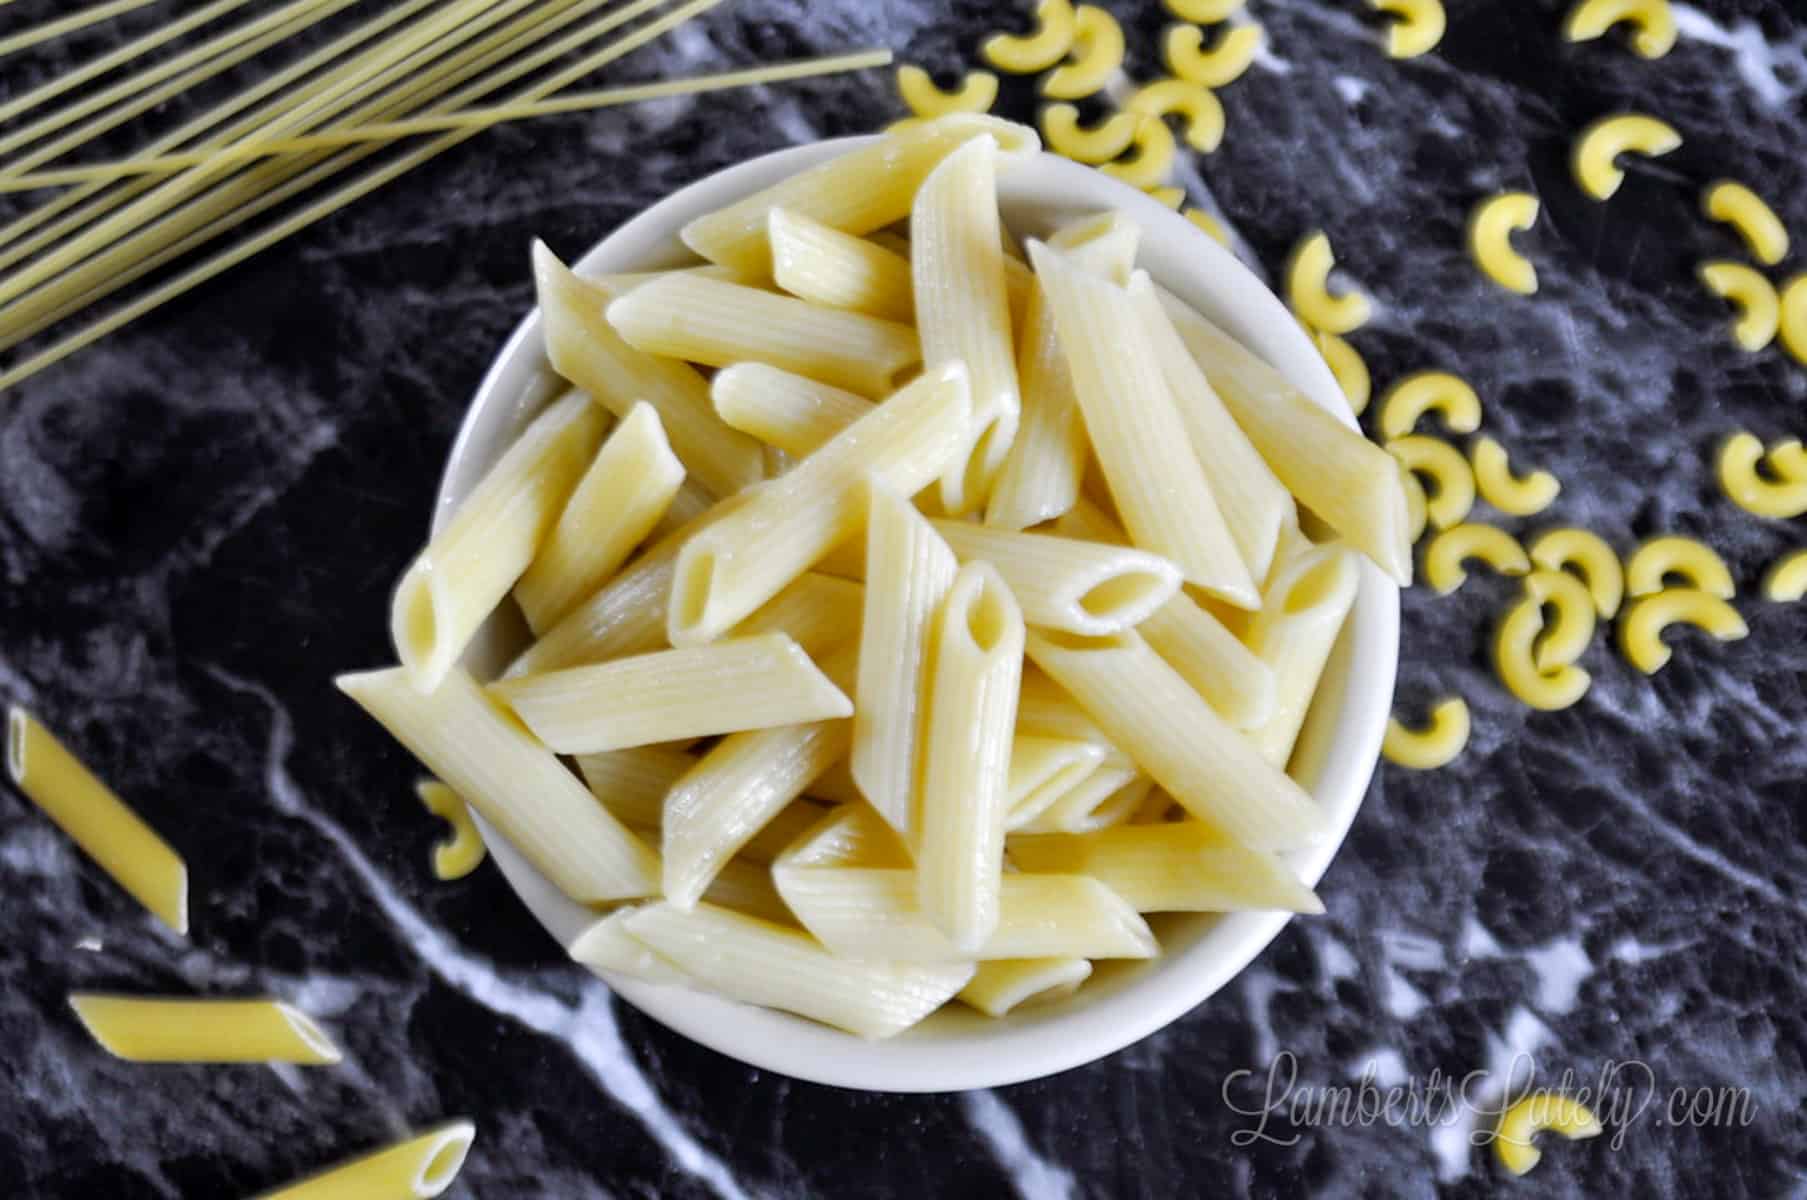 How to Cook Pasta in the Instant Pot